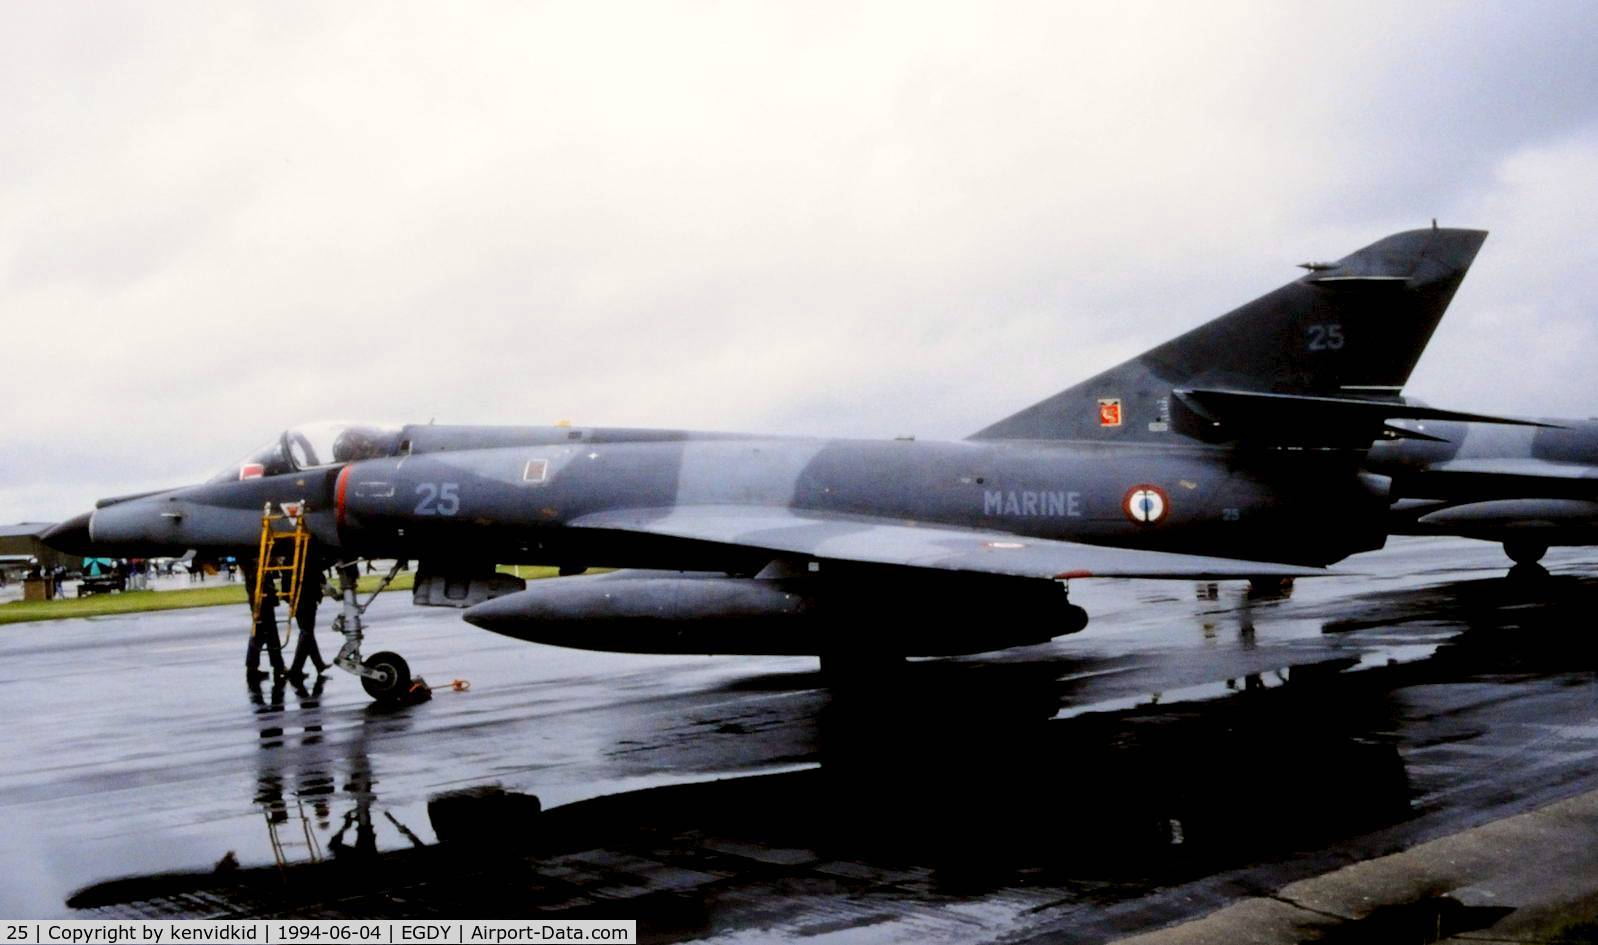 25, Dassault Super Etendard C/N 25, On static display at the RNAS Yeovilton 1994 50th Anniversary of D Day photocall. It rained all day.